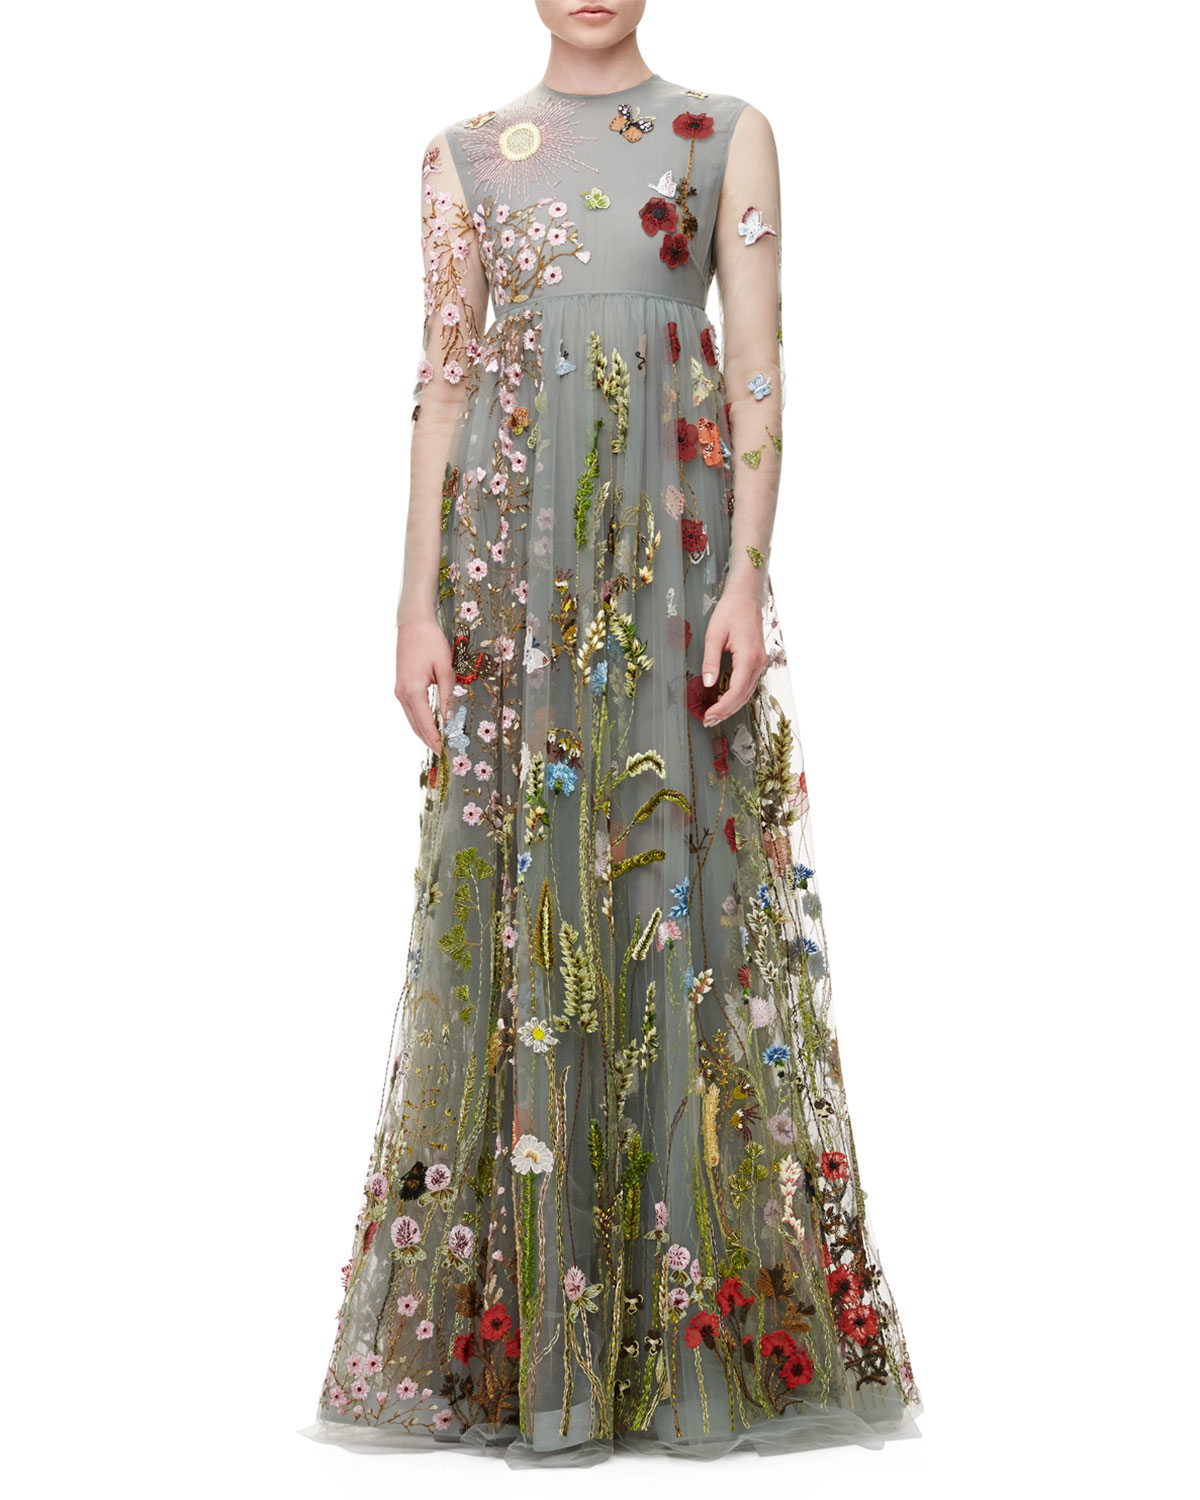 Lyst - Valentino Floral-Embroidered Tulle Empire-Waist Gown in Gray